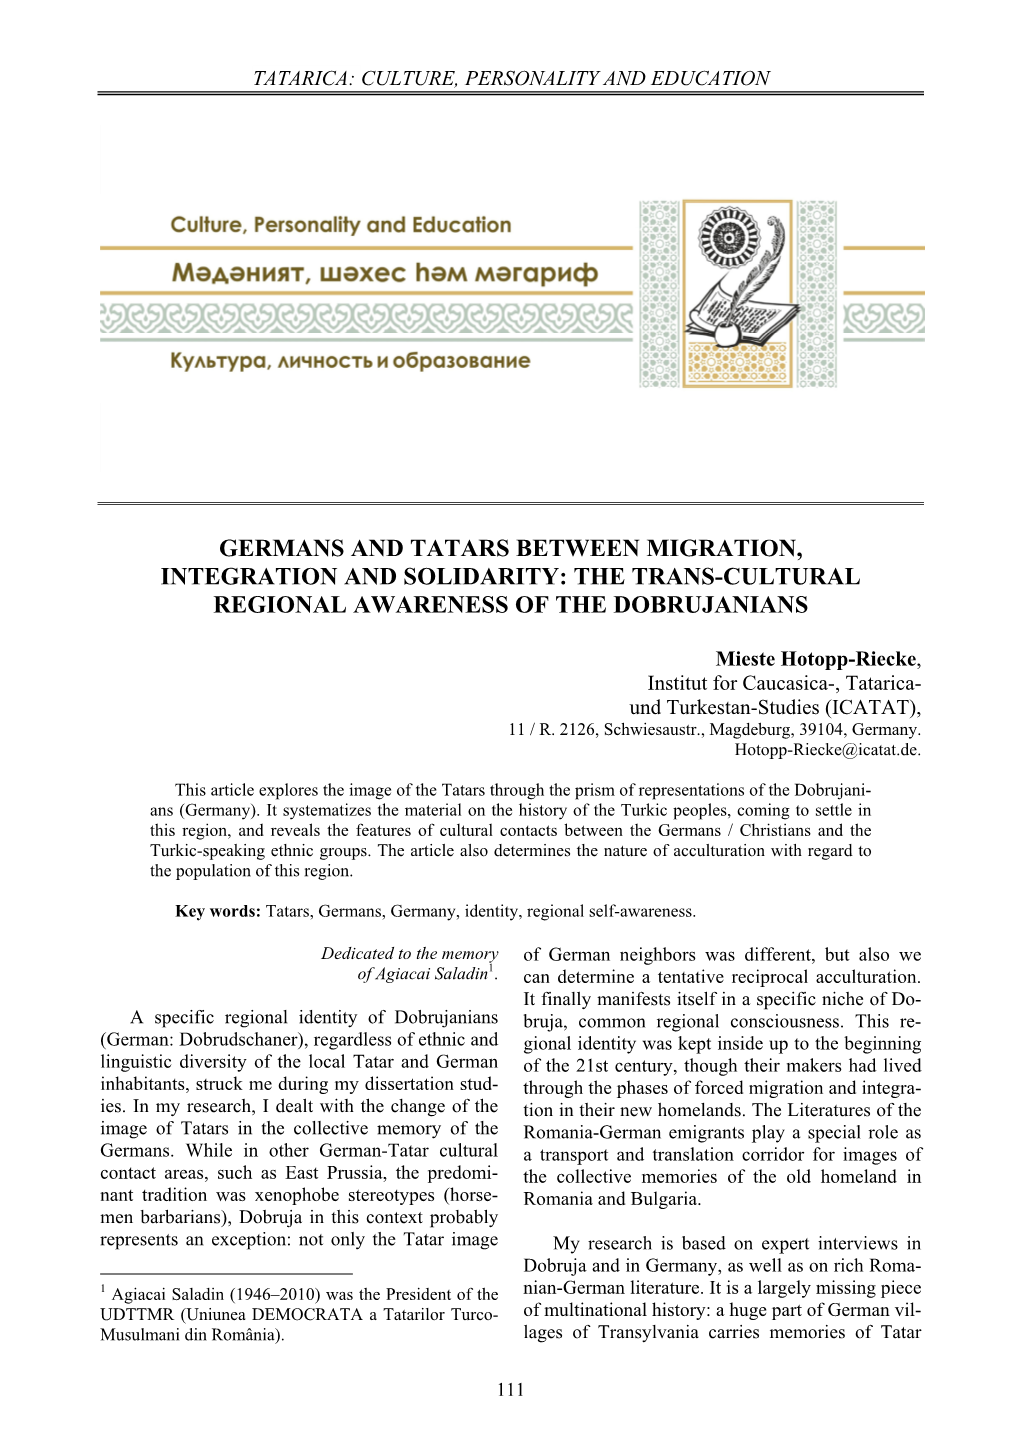 Germans and Tatars Between Migration, Integration and Solidarity: the Trans-Cultural Regional Awareness of the Dobrujanians